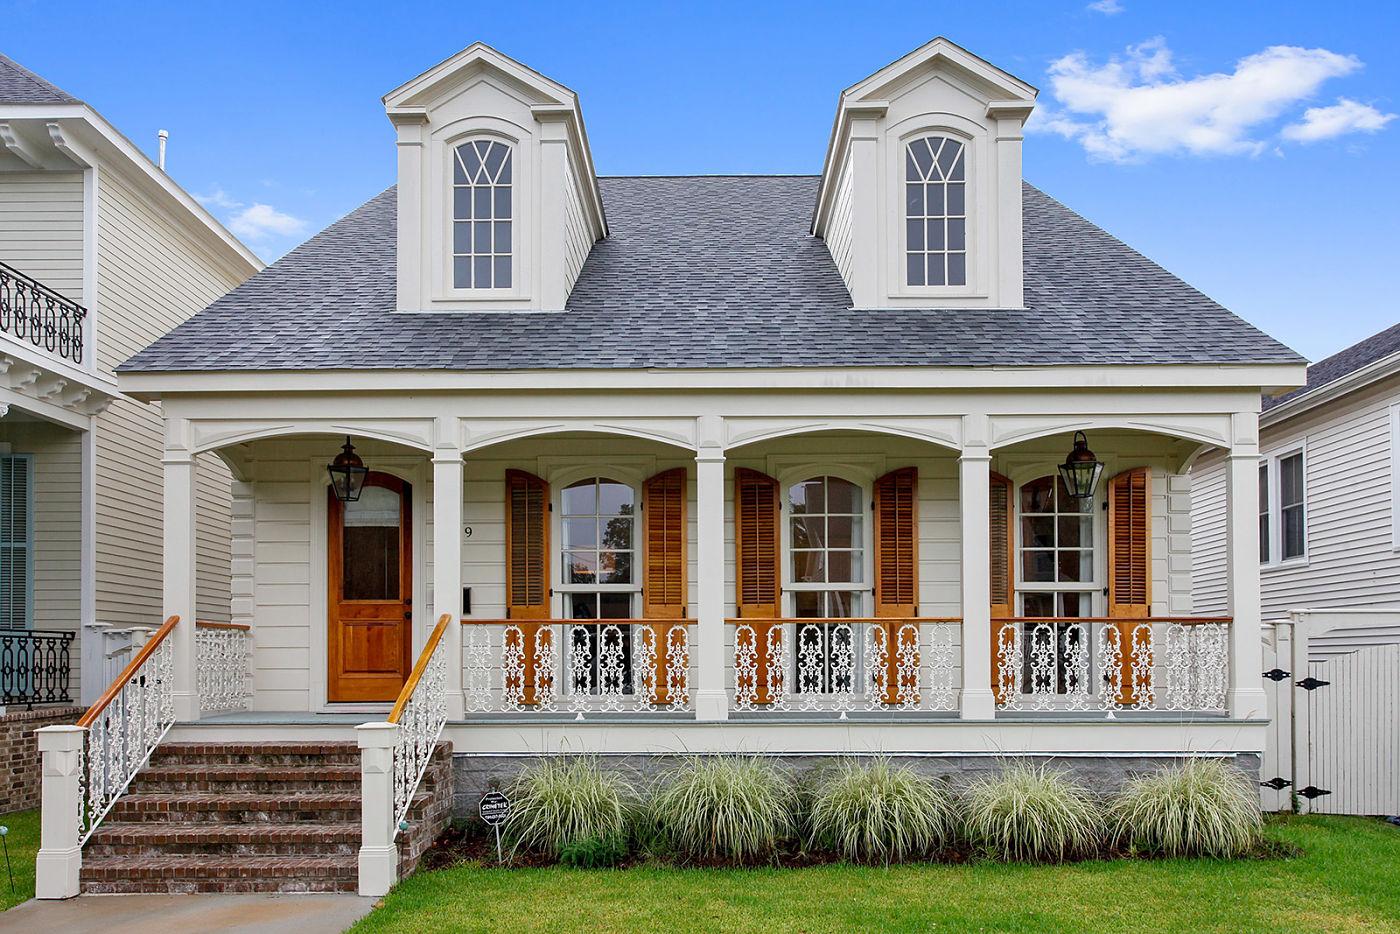 Homes For Sale in Lakeview - NOLA Homes Search